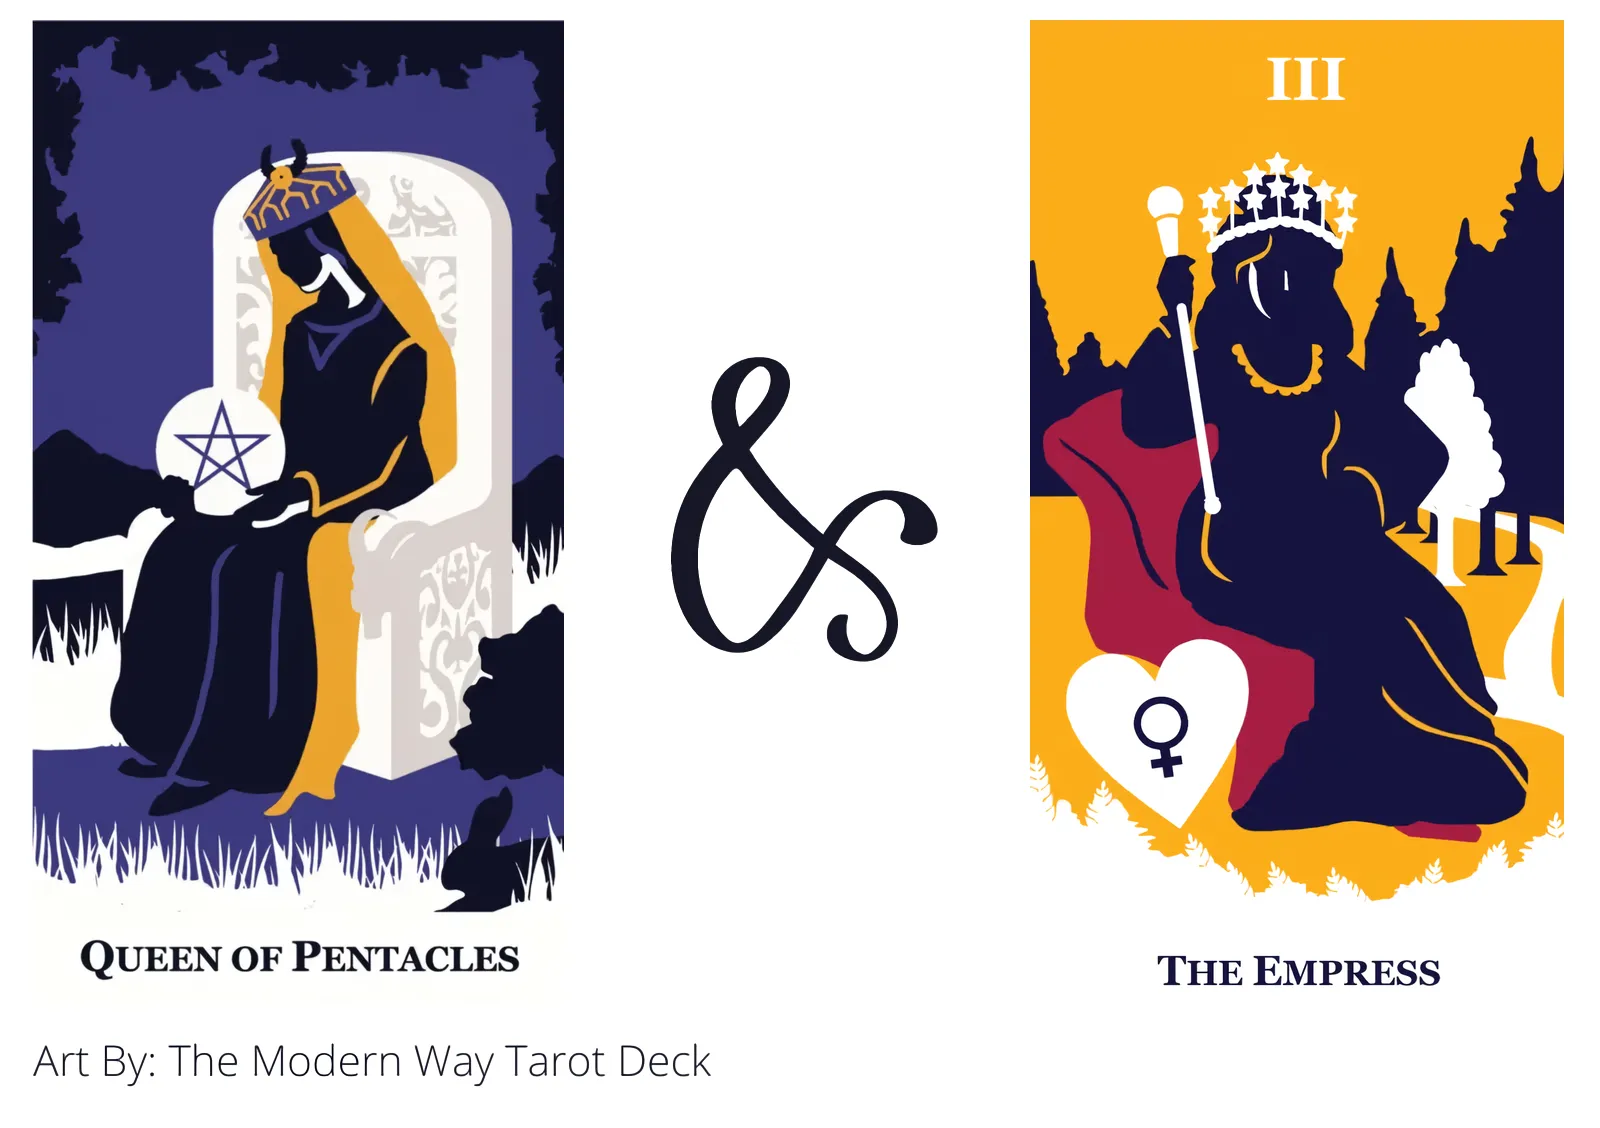 queen of pentacles and the empress tarot cards together